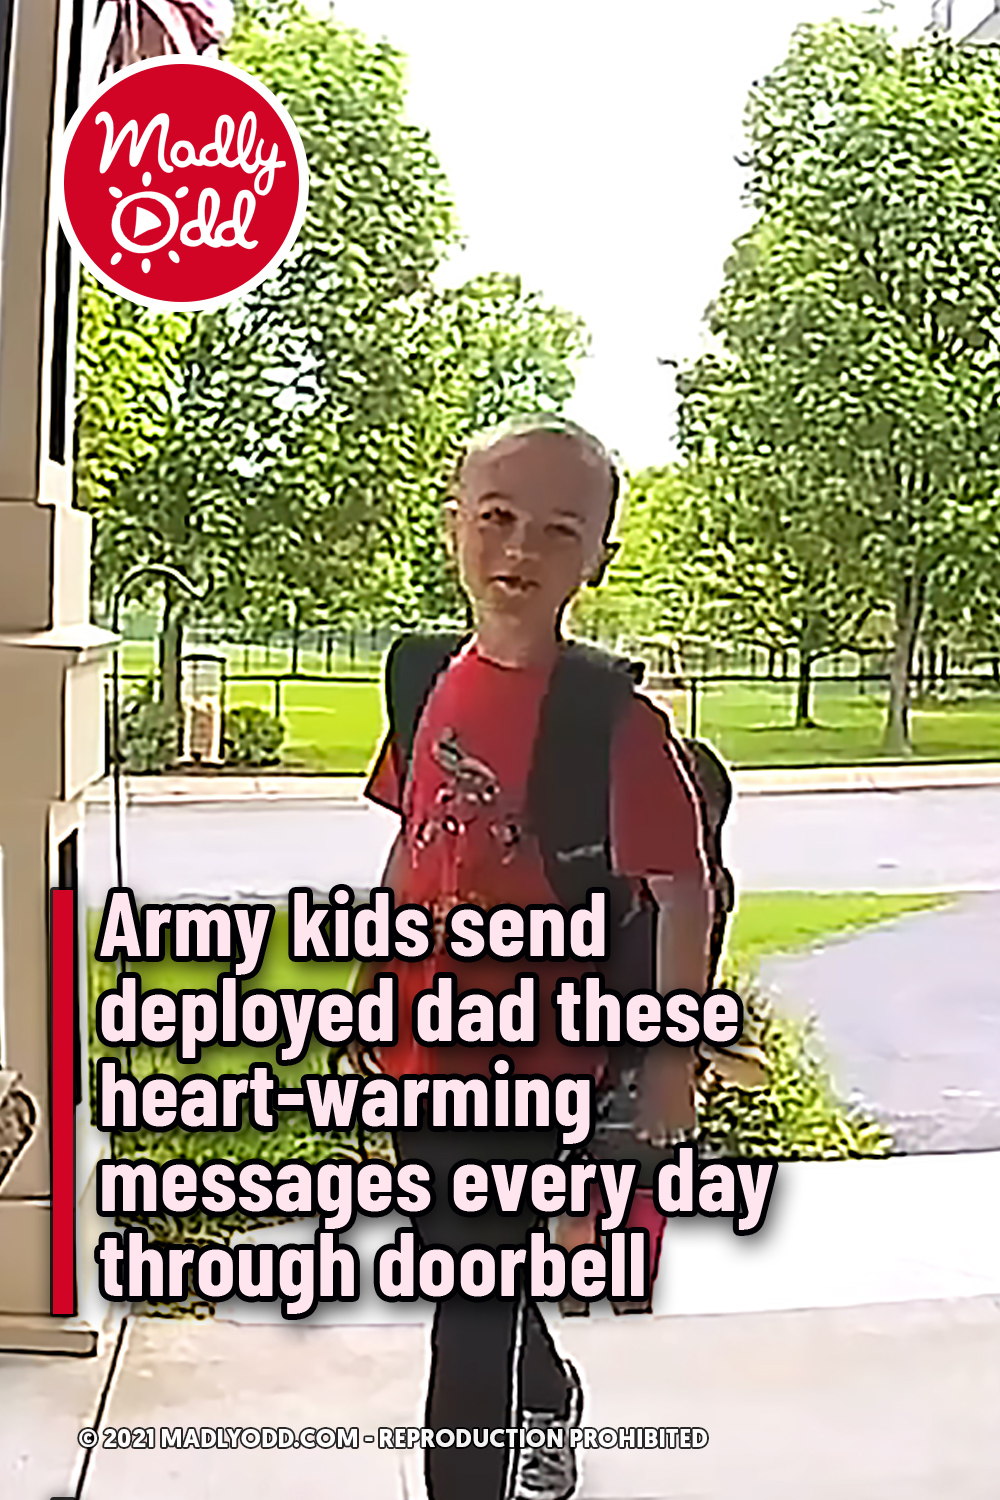 Army kids send deployed dad these heart-warming messages every day through doorbell